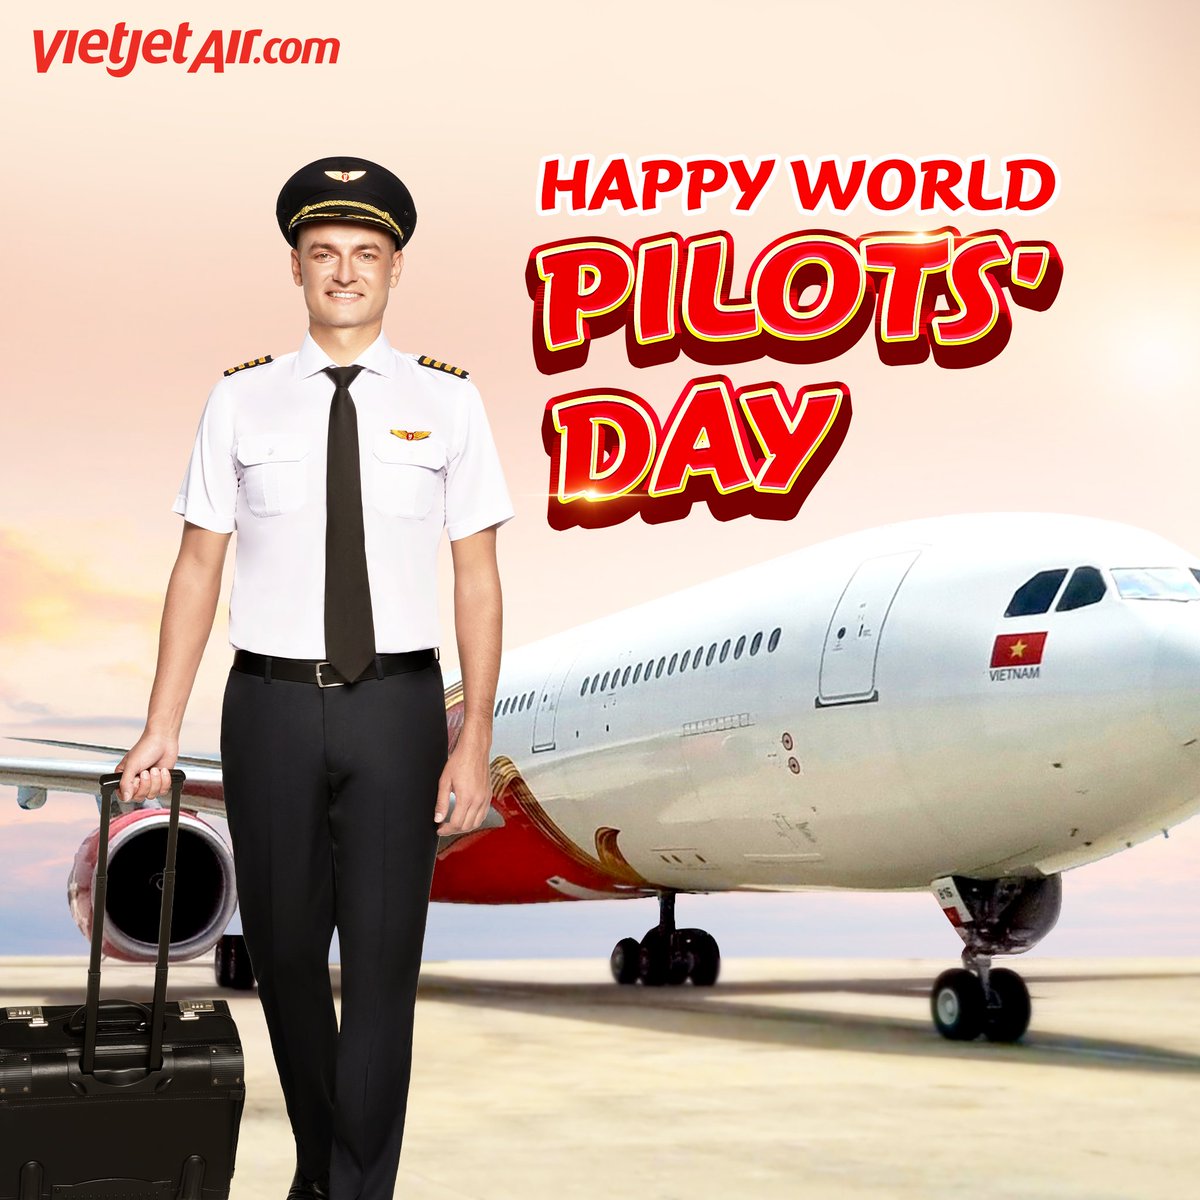 Happy World Pilots' Day! ✈️ 💪 Shoutout to all the amazing aviators out there for smooth takeoffs & gentle landings. 📣 Don’t forget to show your appreciation by flying with Vietjet! #Vietjet